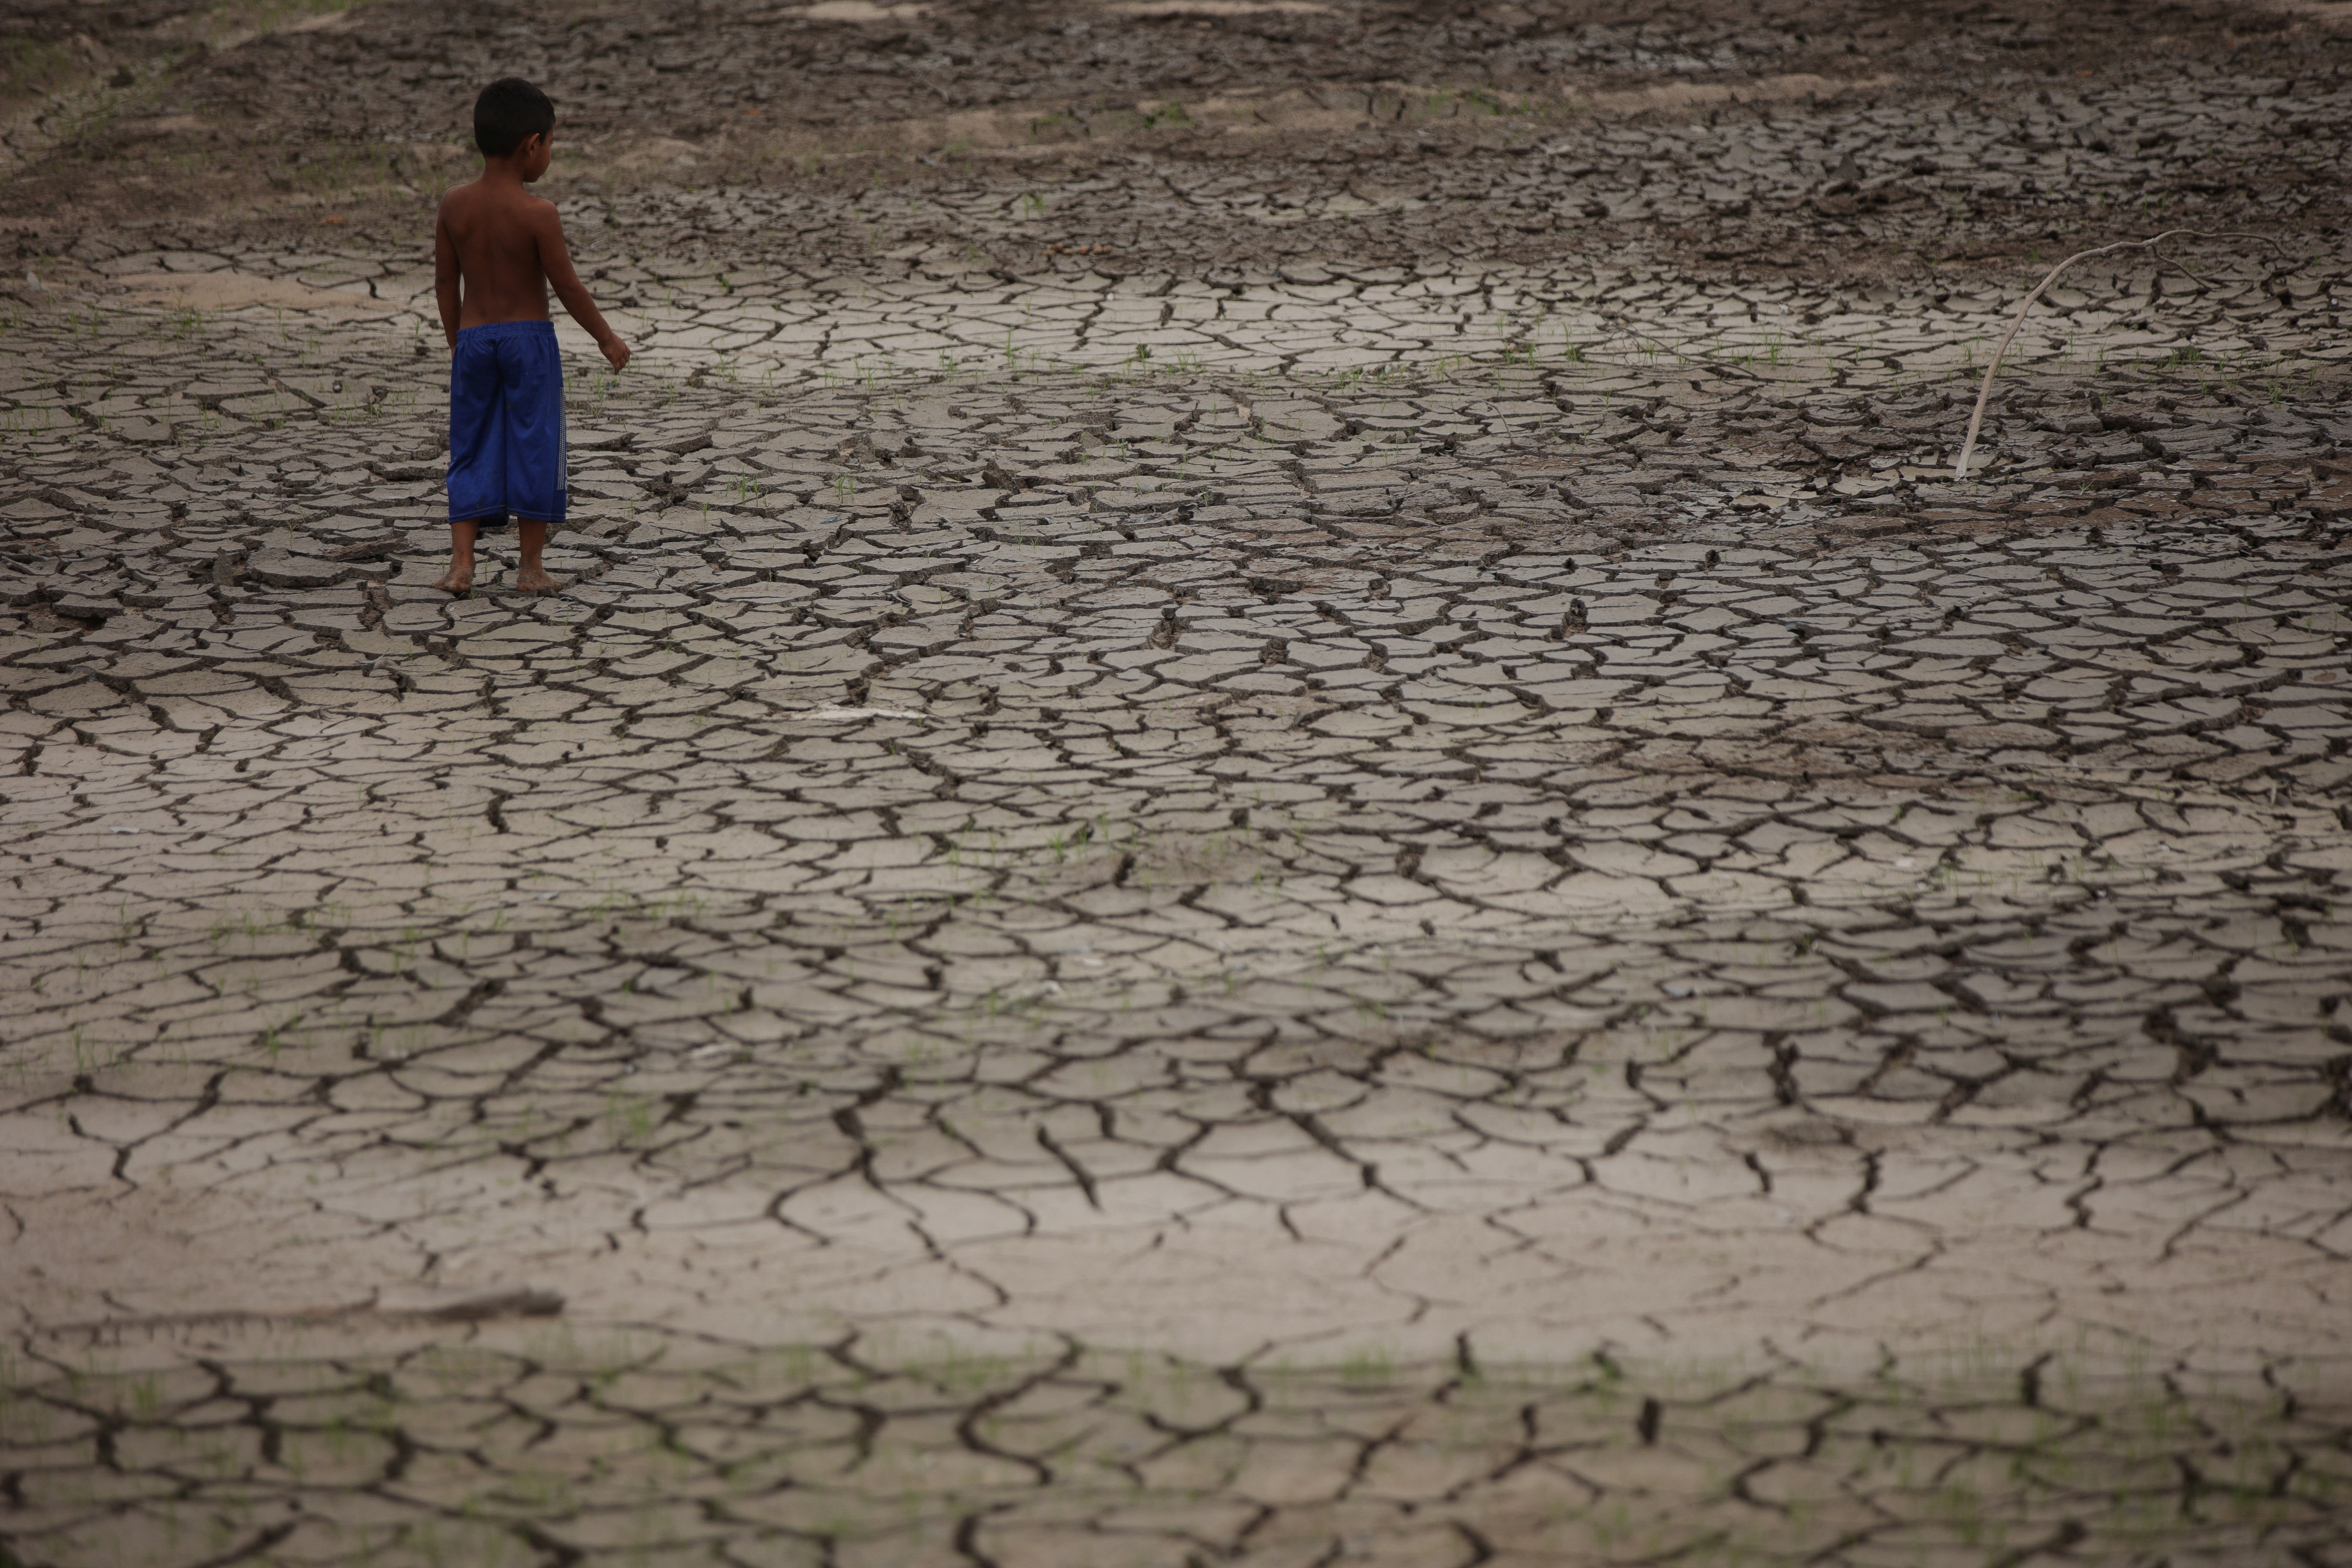 Brazil drought reduces Amazon river port water levels to 121-year record low